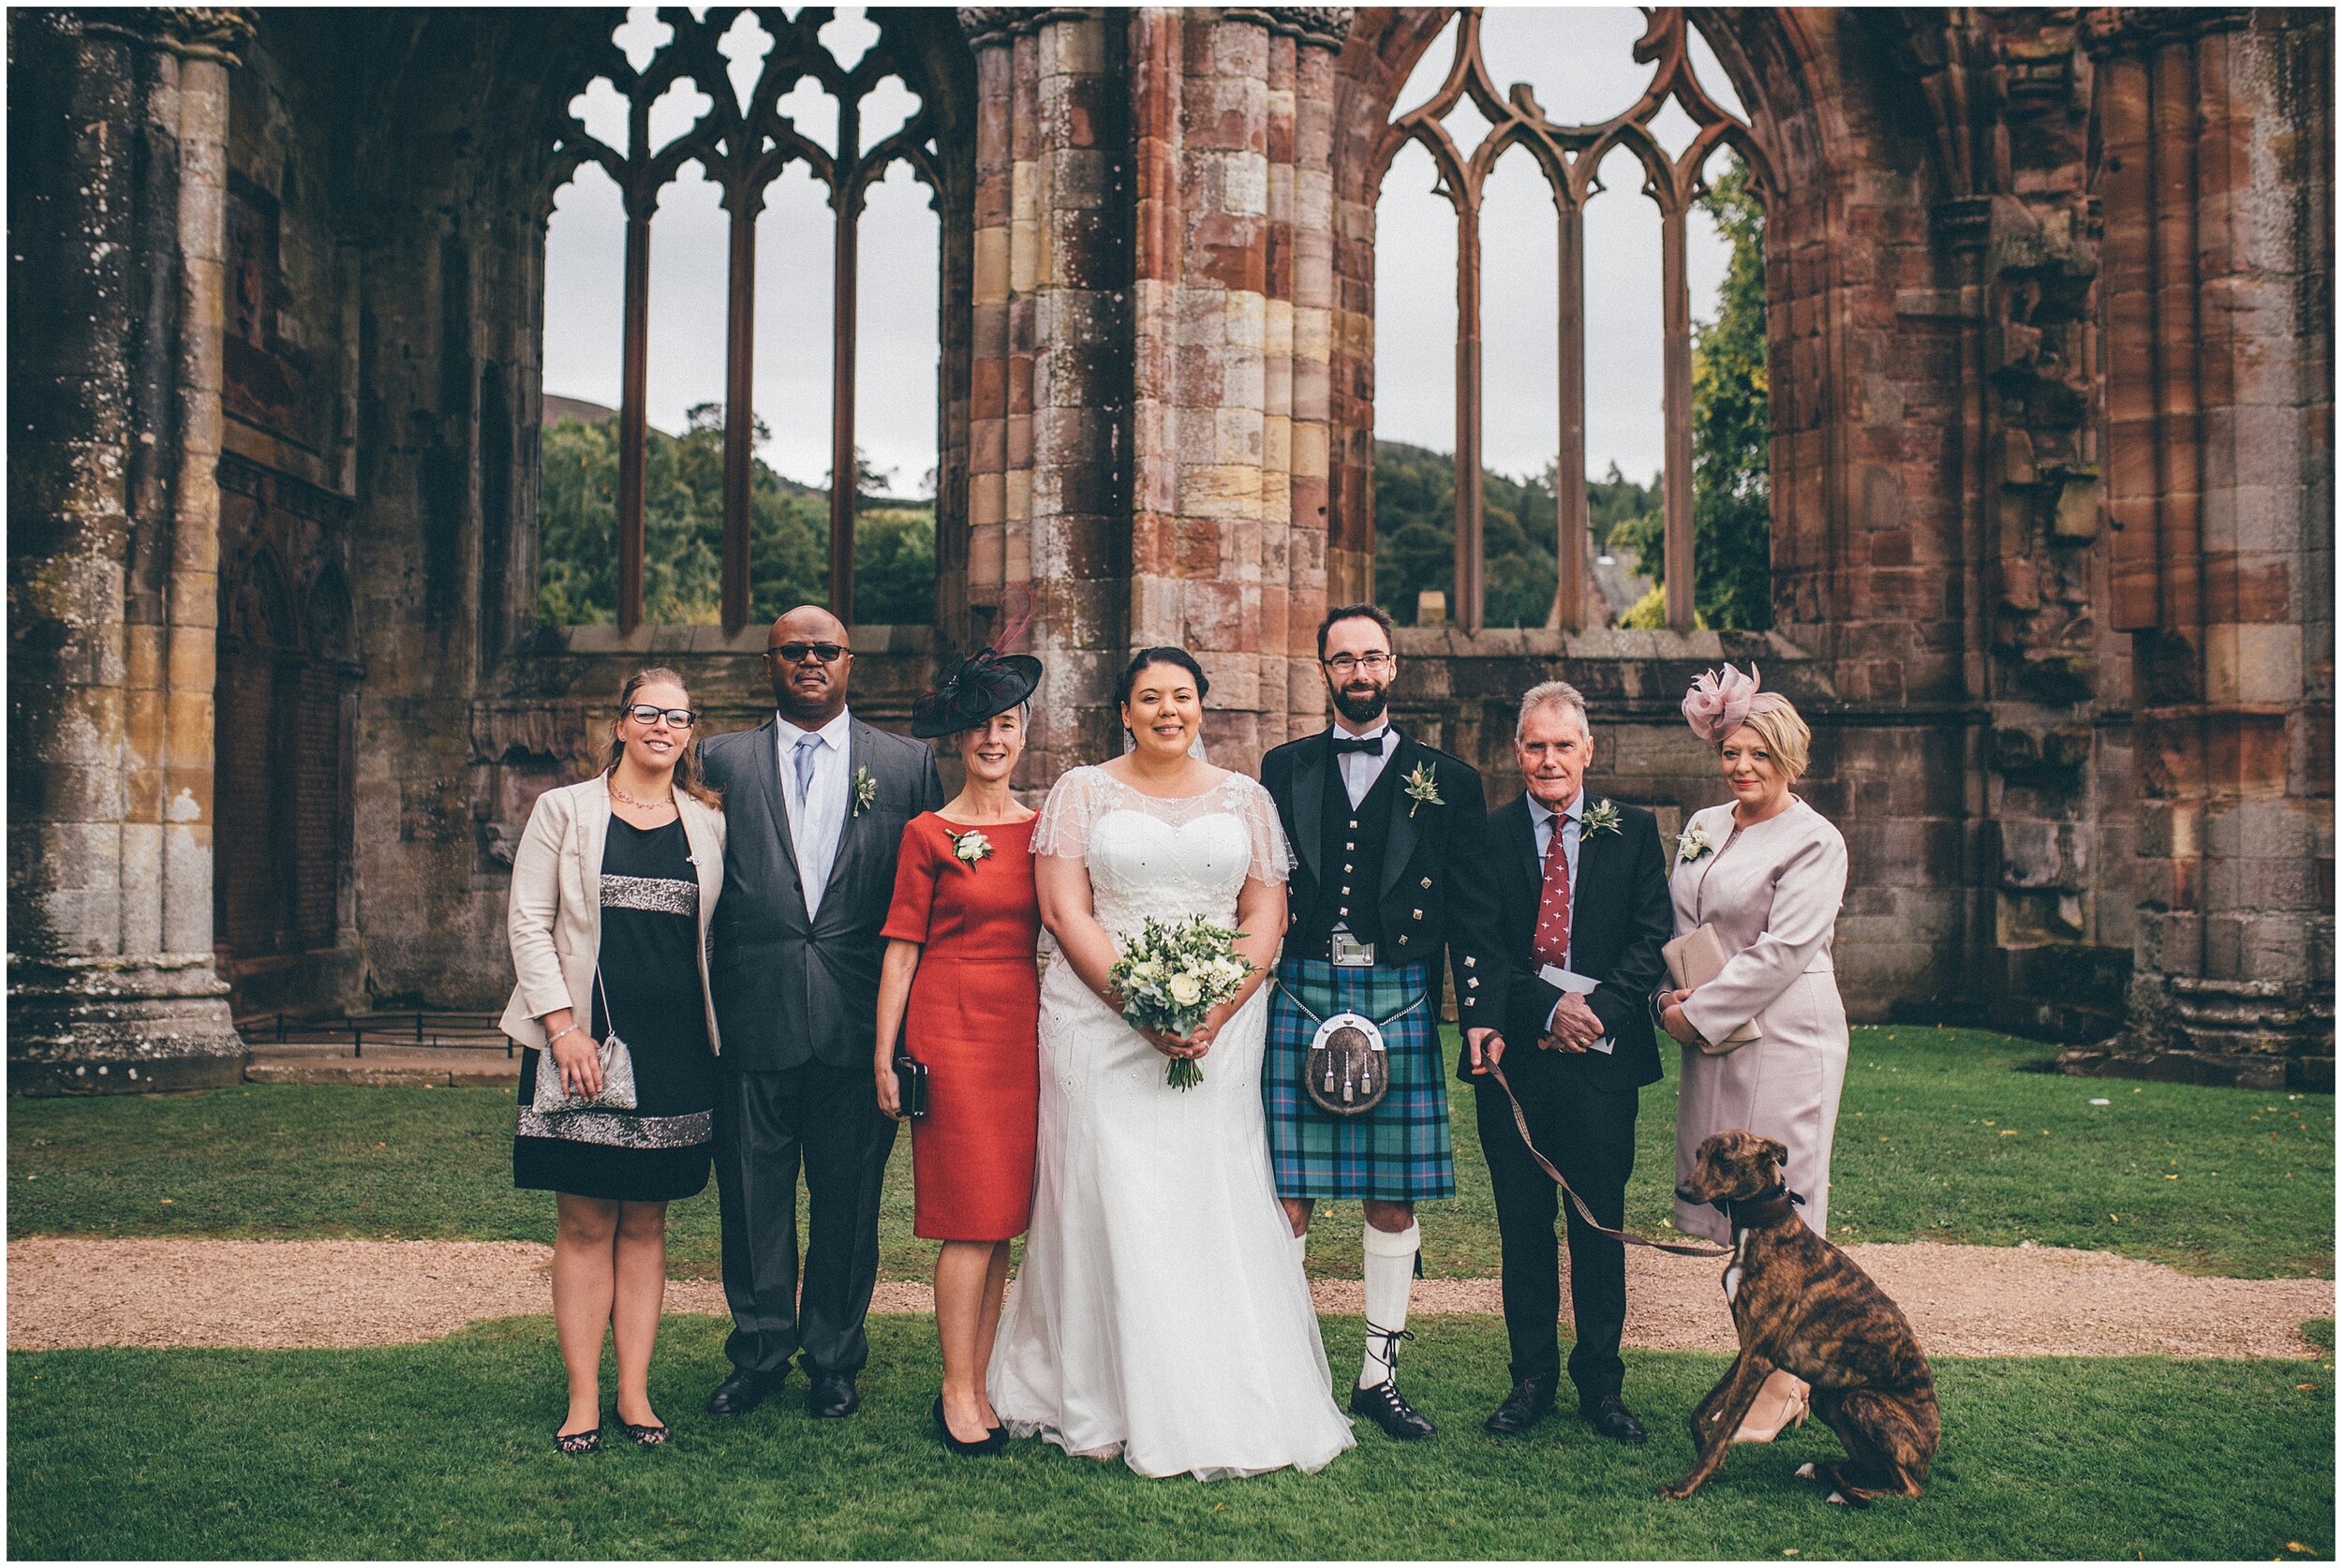 Wedding guests at a wedding in Melrose Abbey on Scottish Borders.